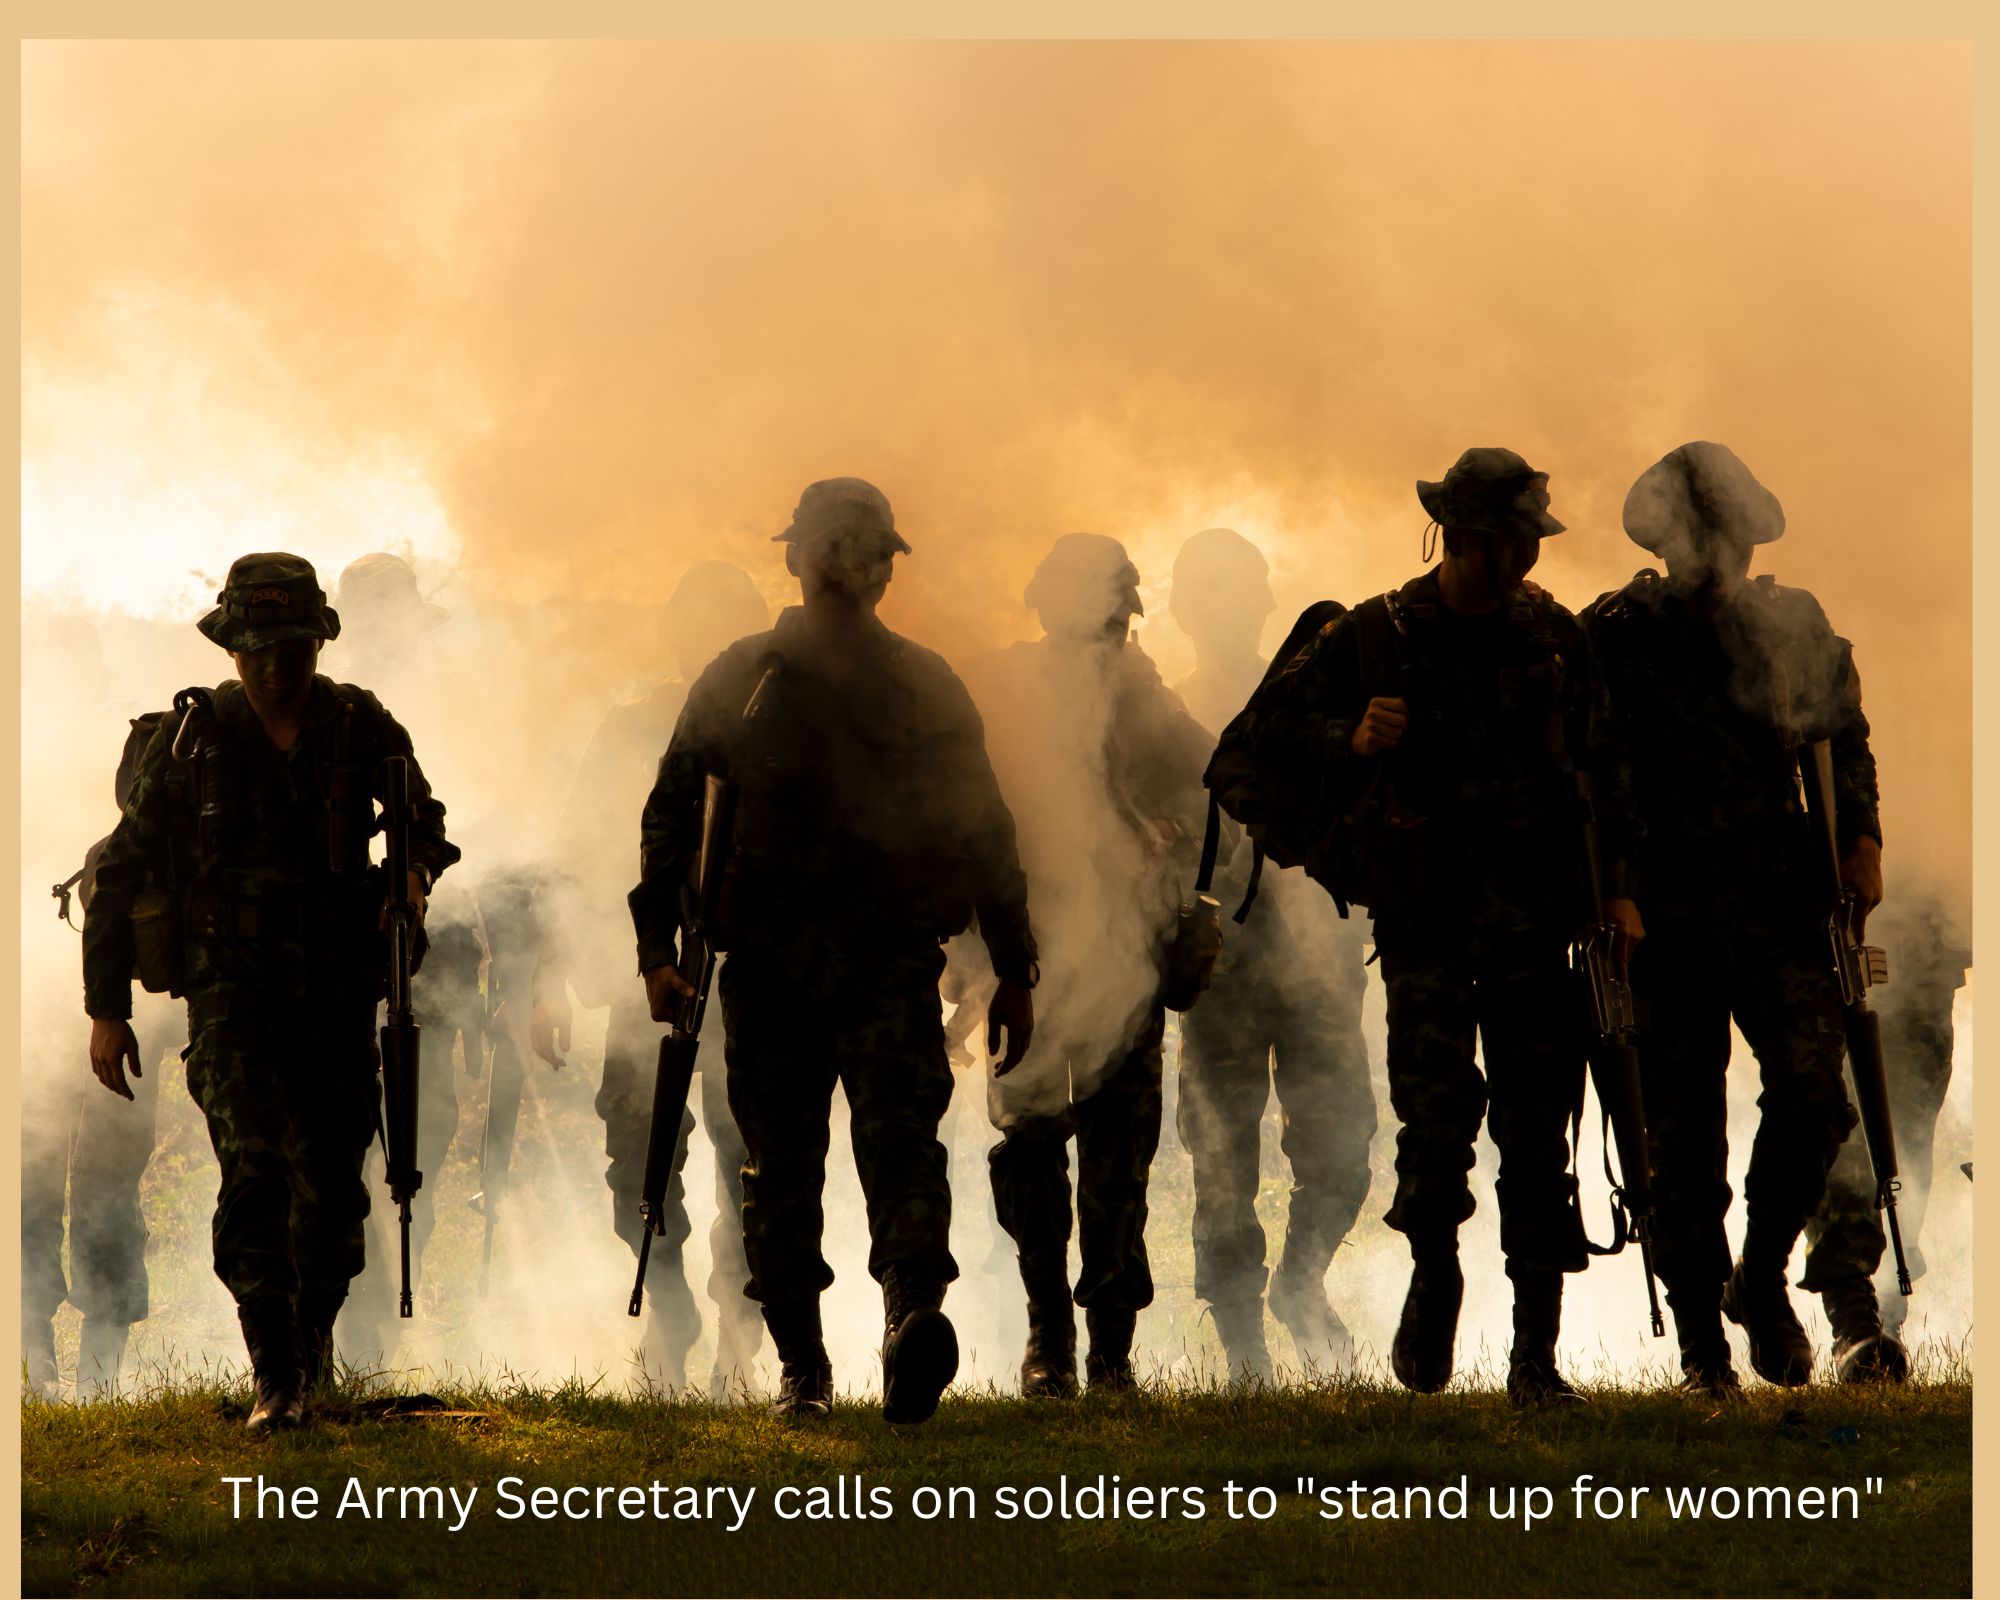 The Army Secretary calls on soldiers to "stand up for women"